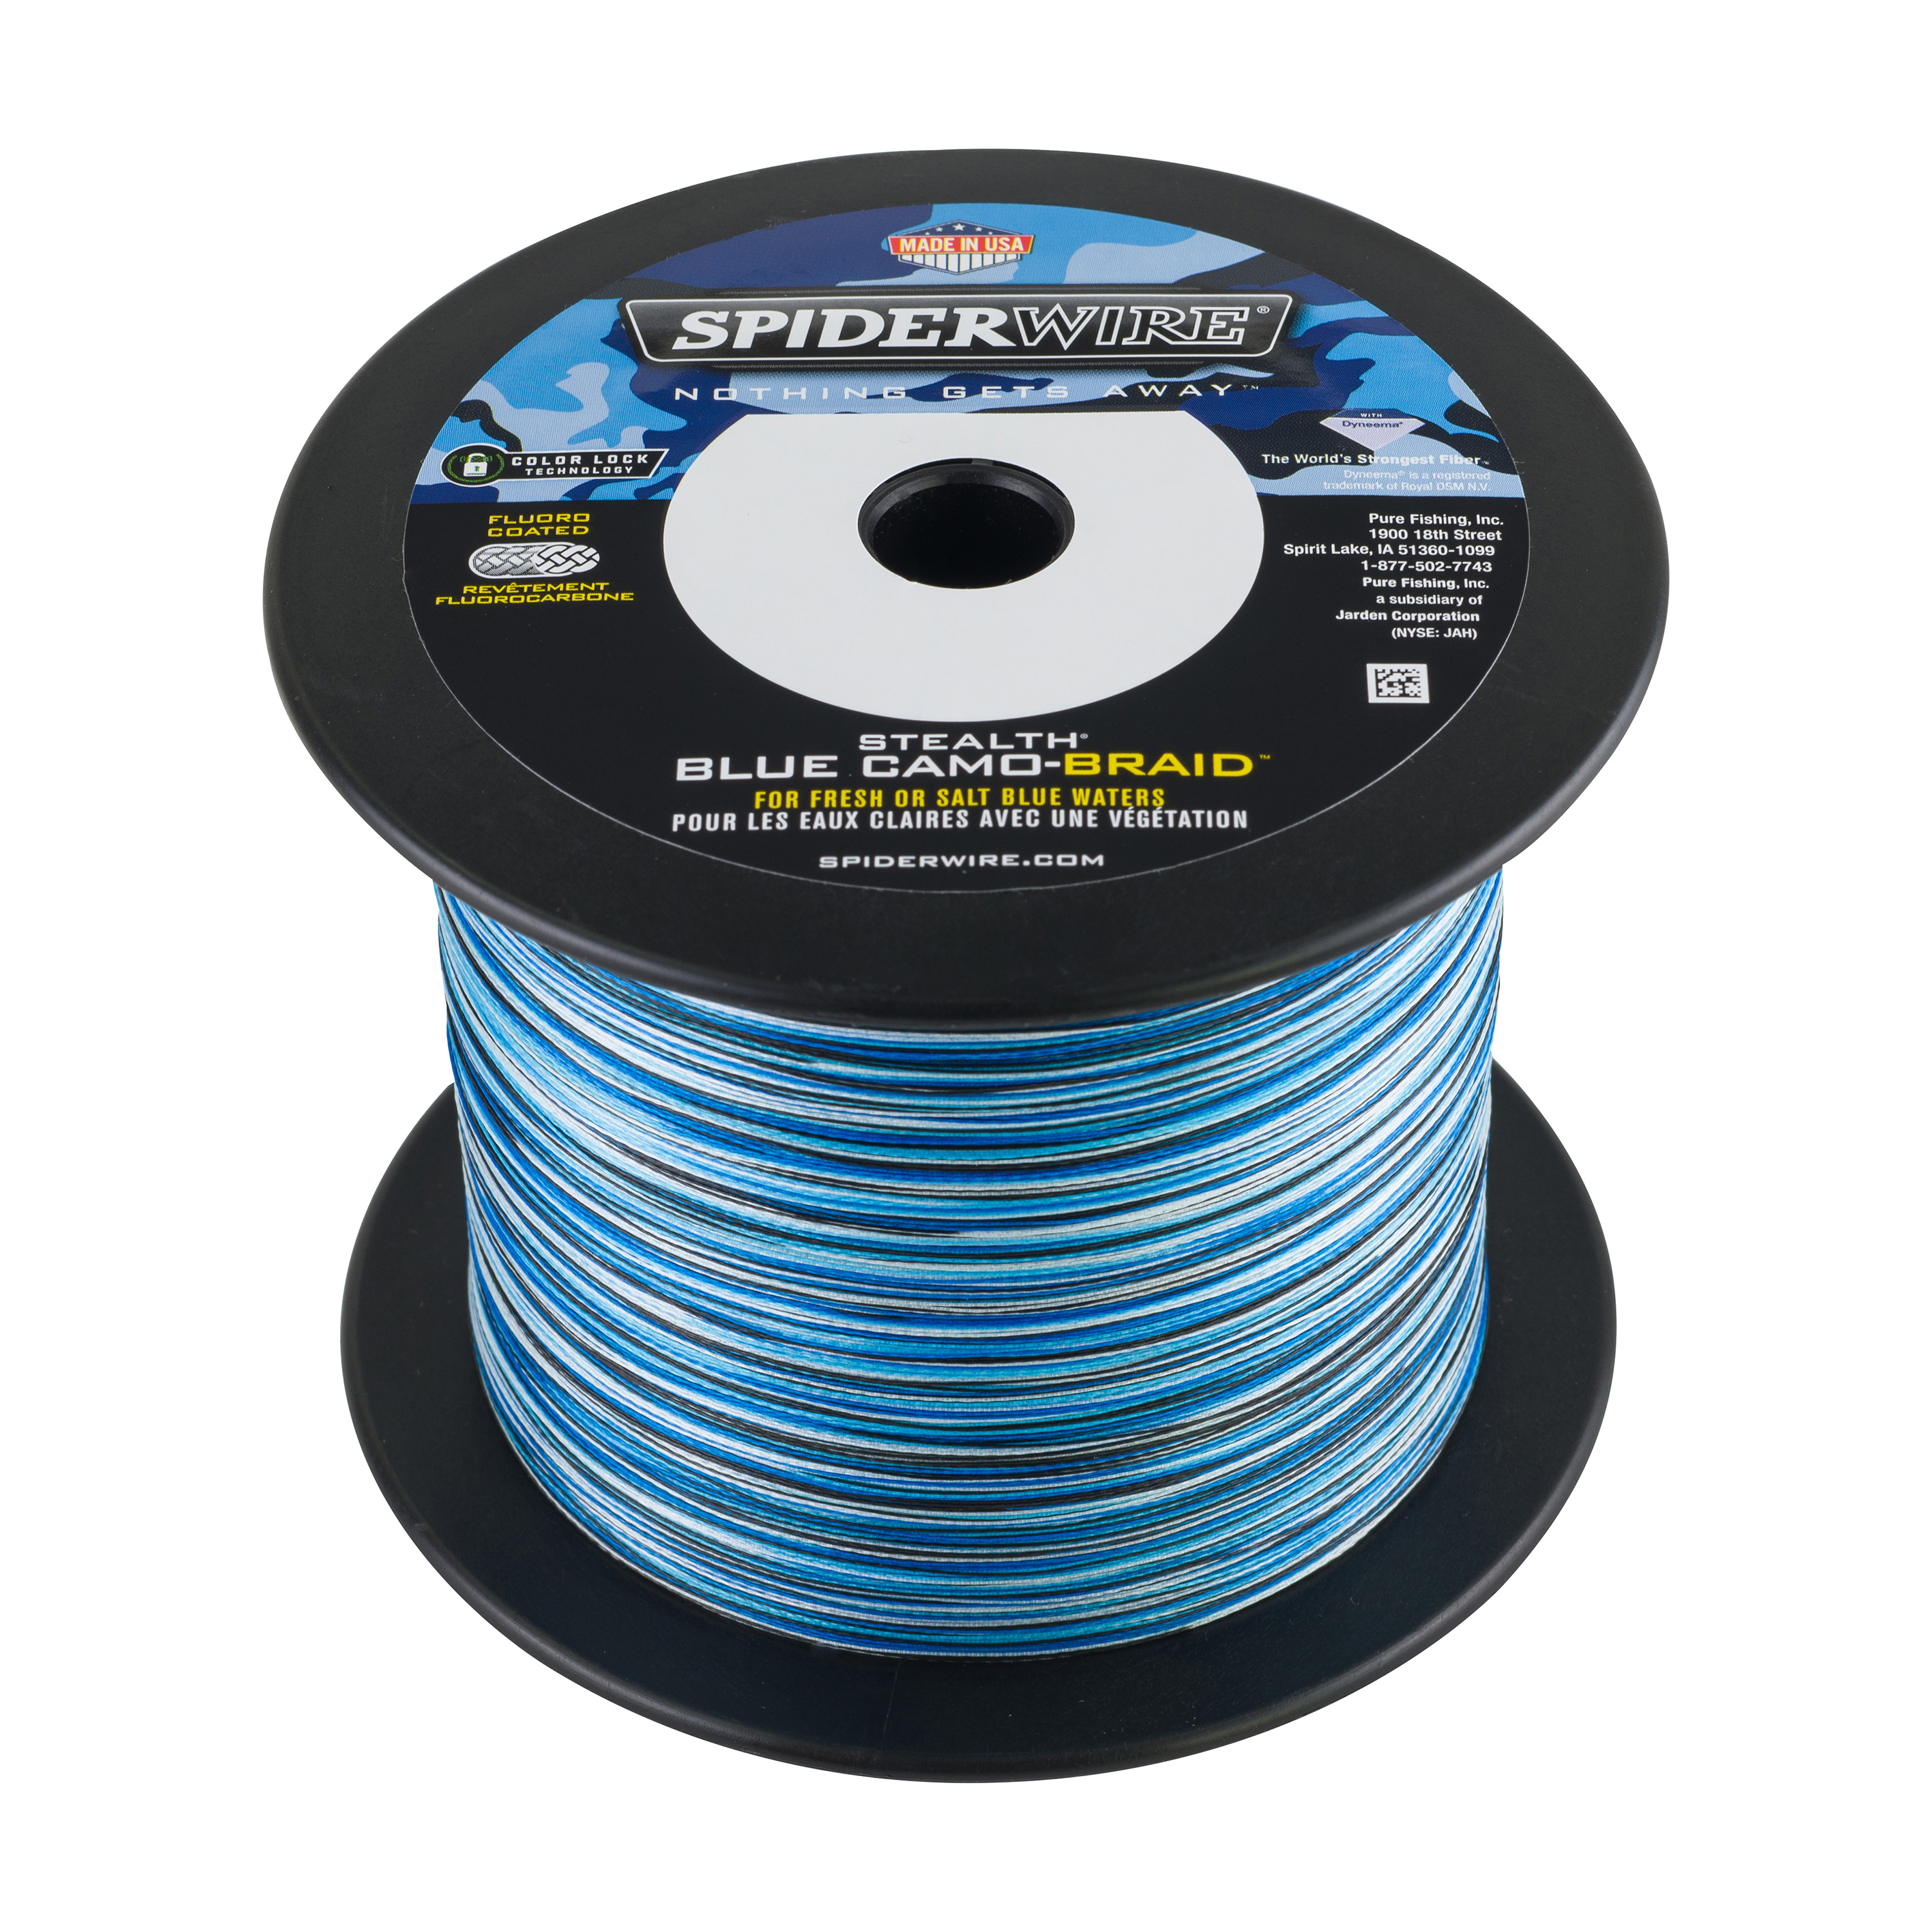 SpiderWire Stealth® Smooth Superline, Moss Green, 20lb | 9kg Fishing Line